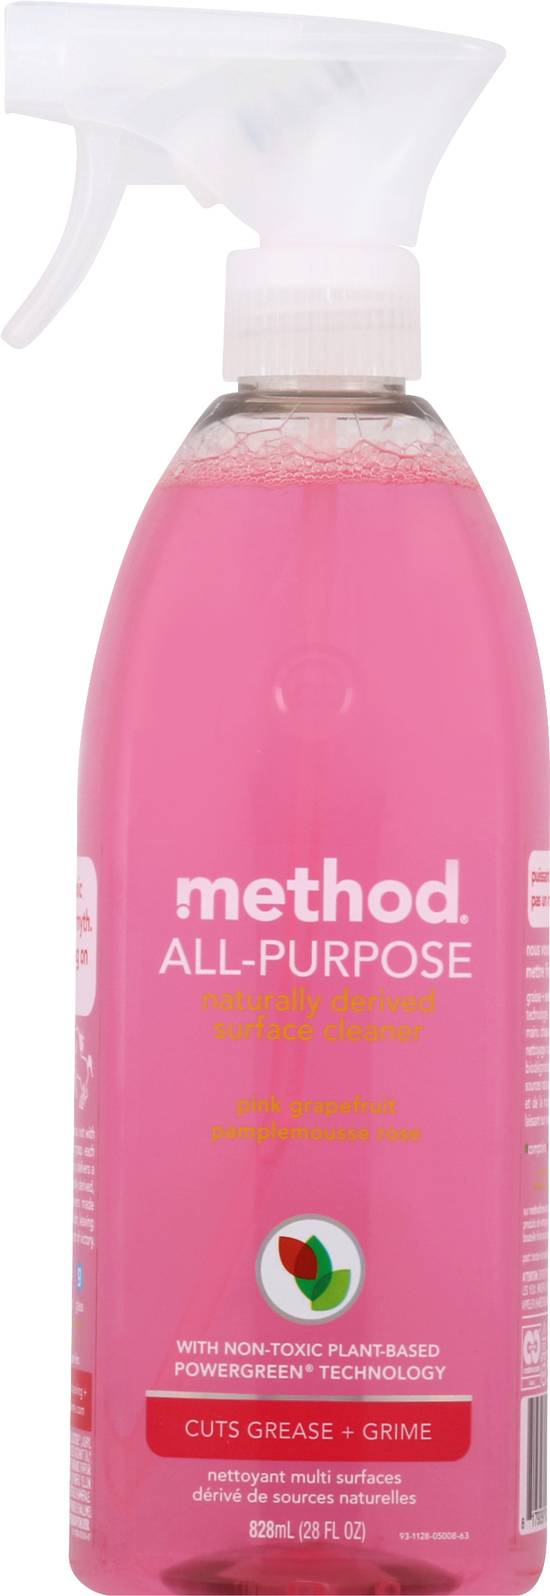 Method Pink Grape Fruit All-Purpose Surface Cleaner